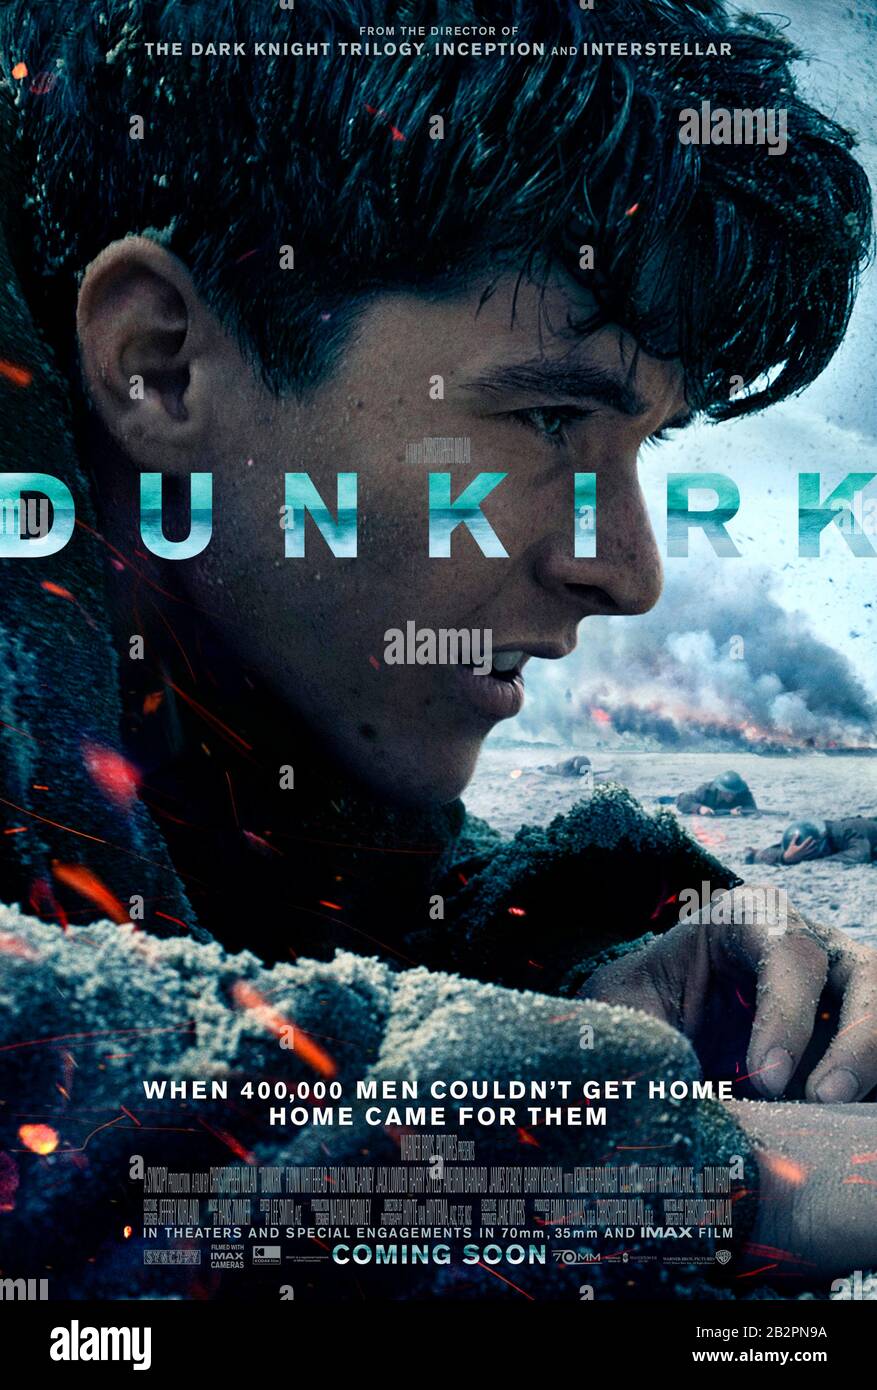 Dunkirk (2017) directed by Christopher Nolan and starring Fionn Whitehead, Barry Keoghan, Mark Rylance, Damien Bonnard. The story of Operation Dynamo, the evacuation of Allied soldiers from the beaches of Dunkirk at the start of World War II after the Battle of France. Stock Photo